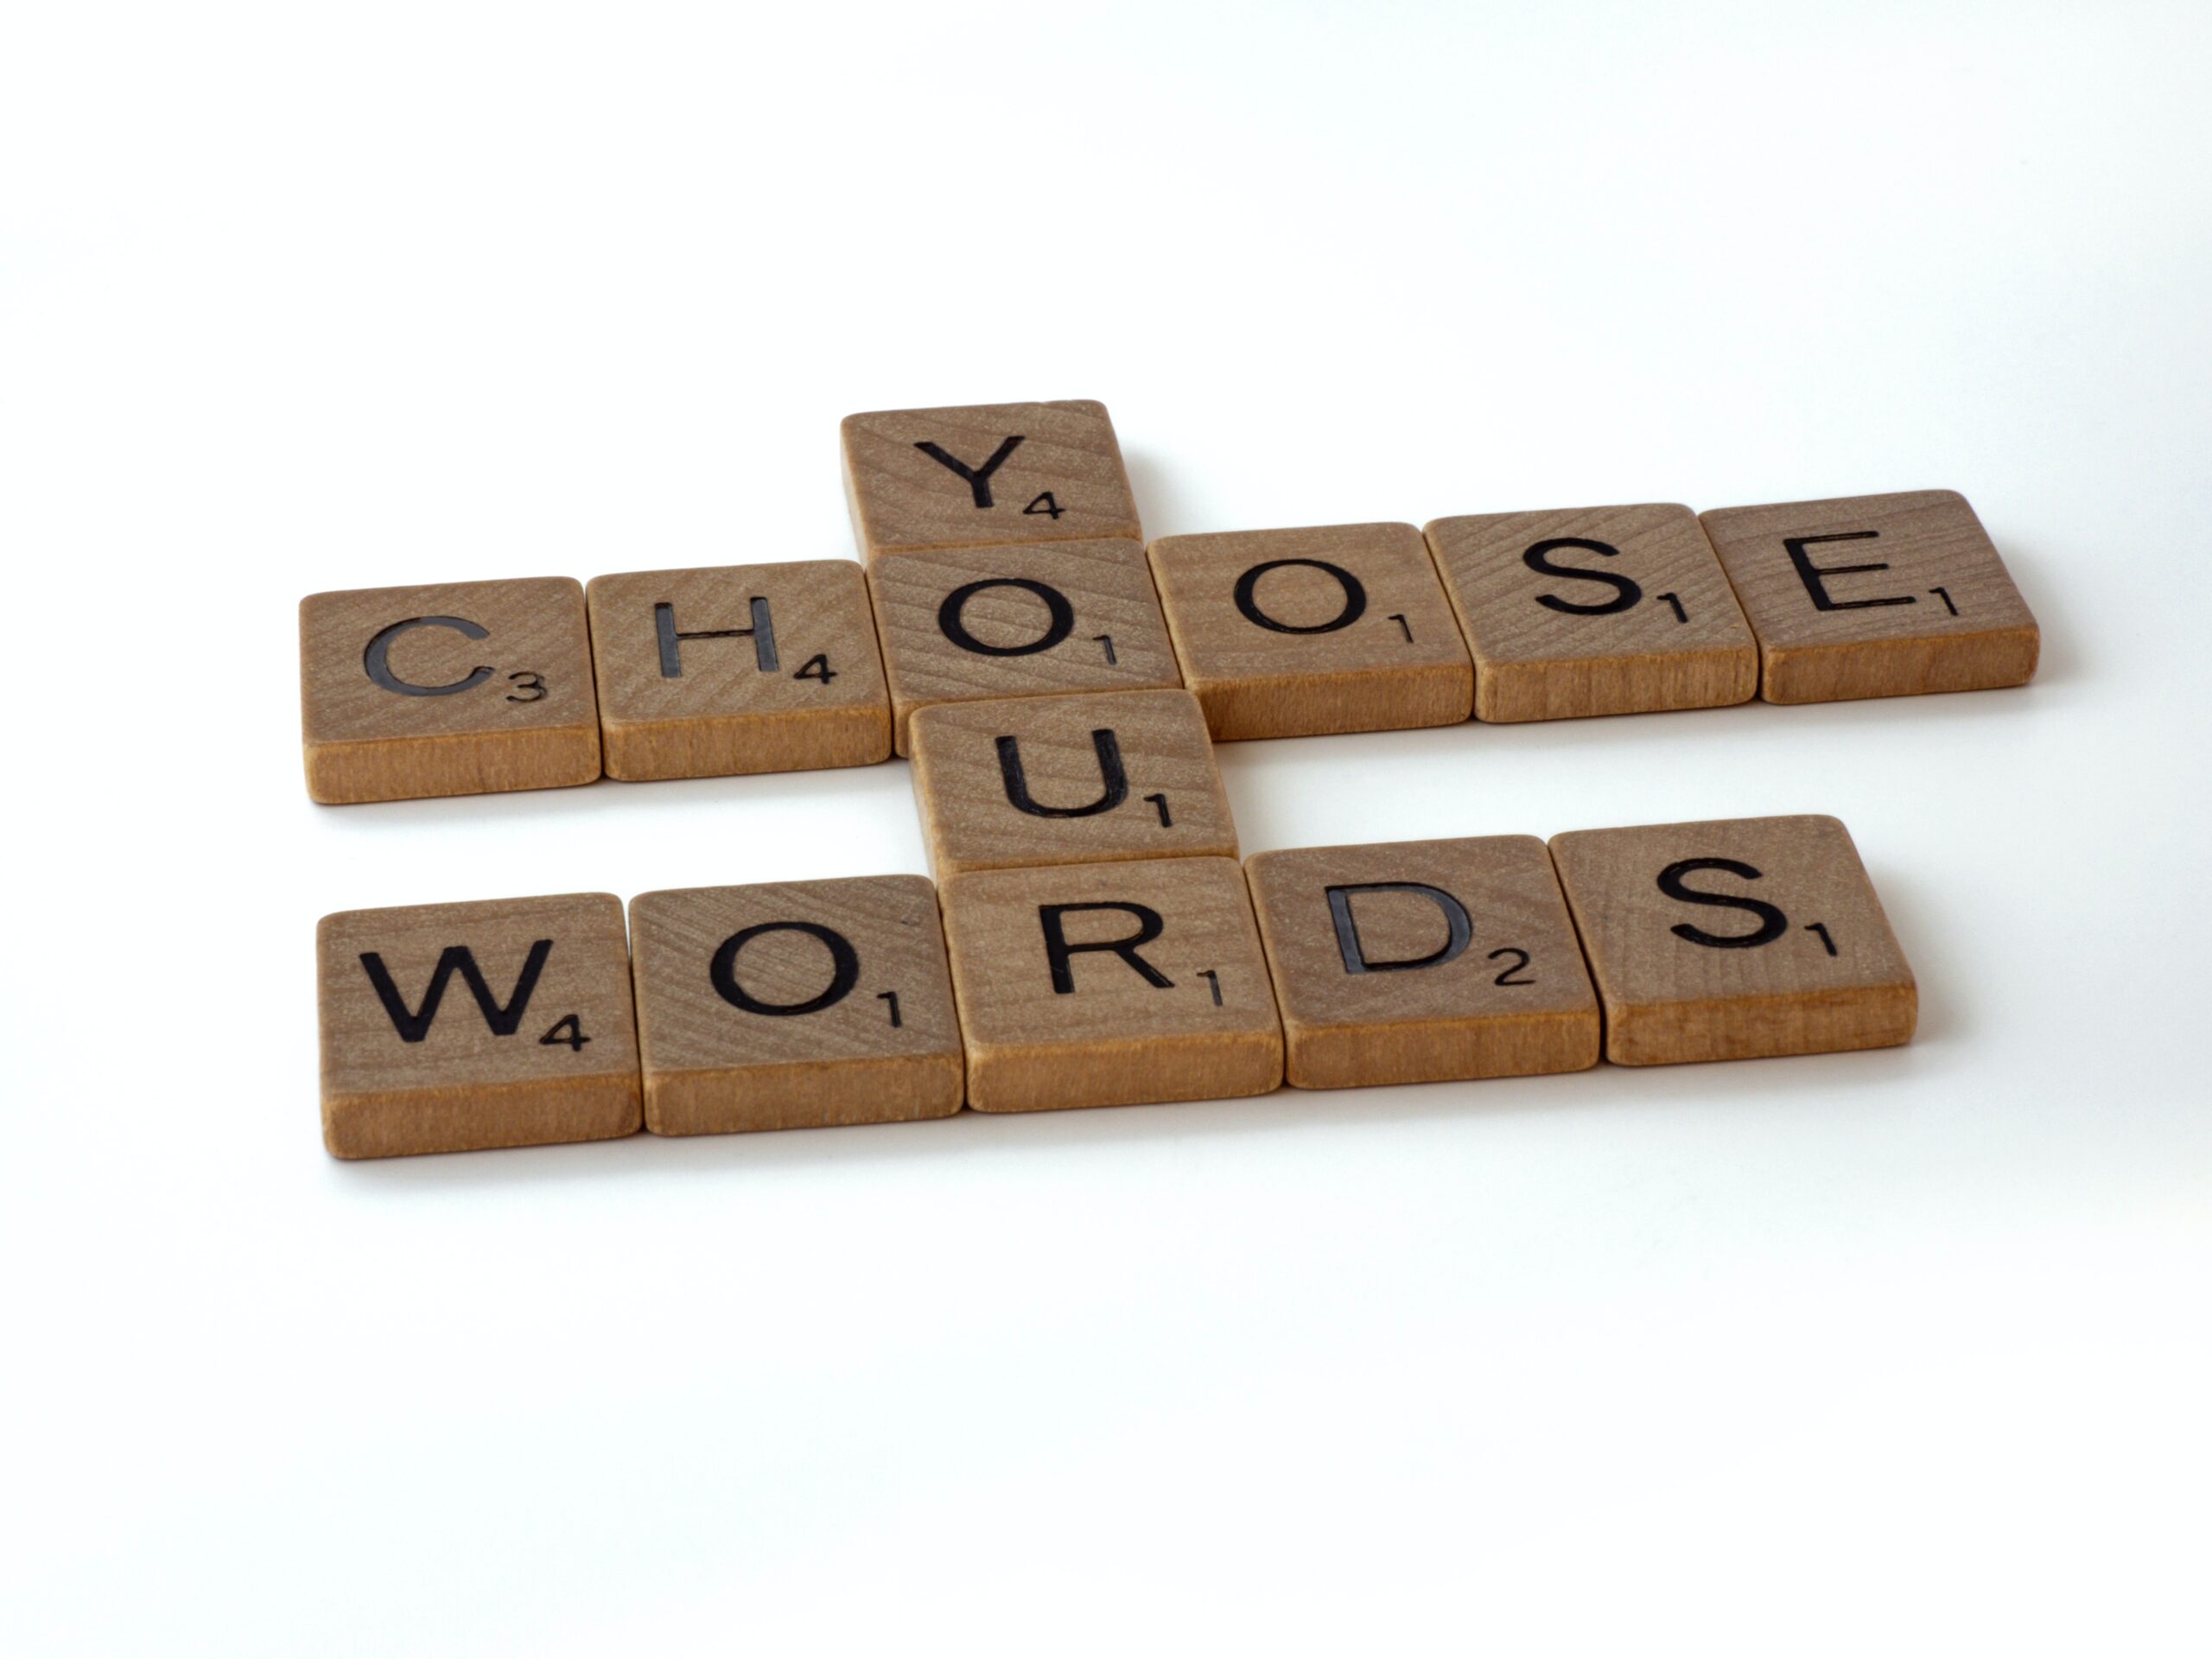 Scrabble letters spelling out "Choose Your Words"